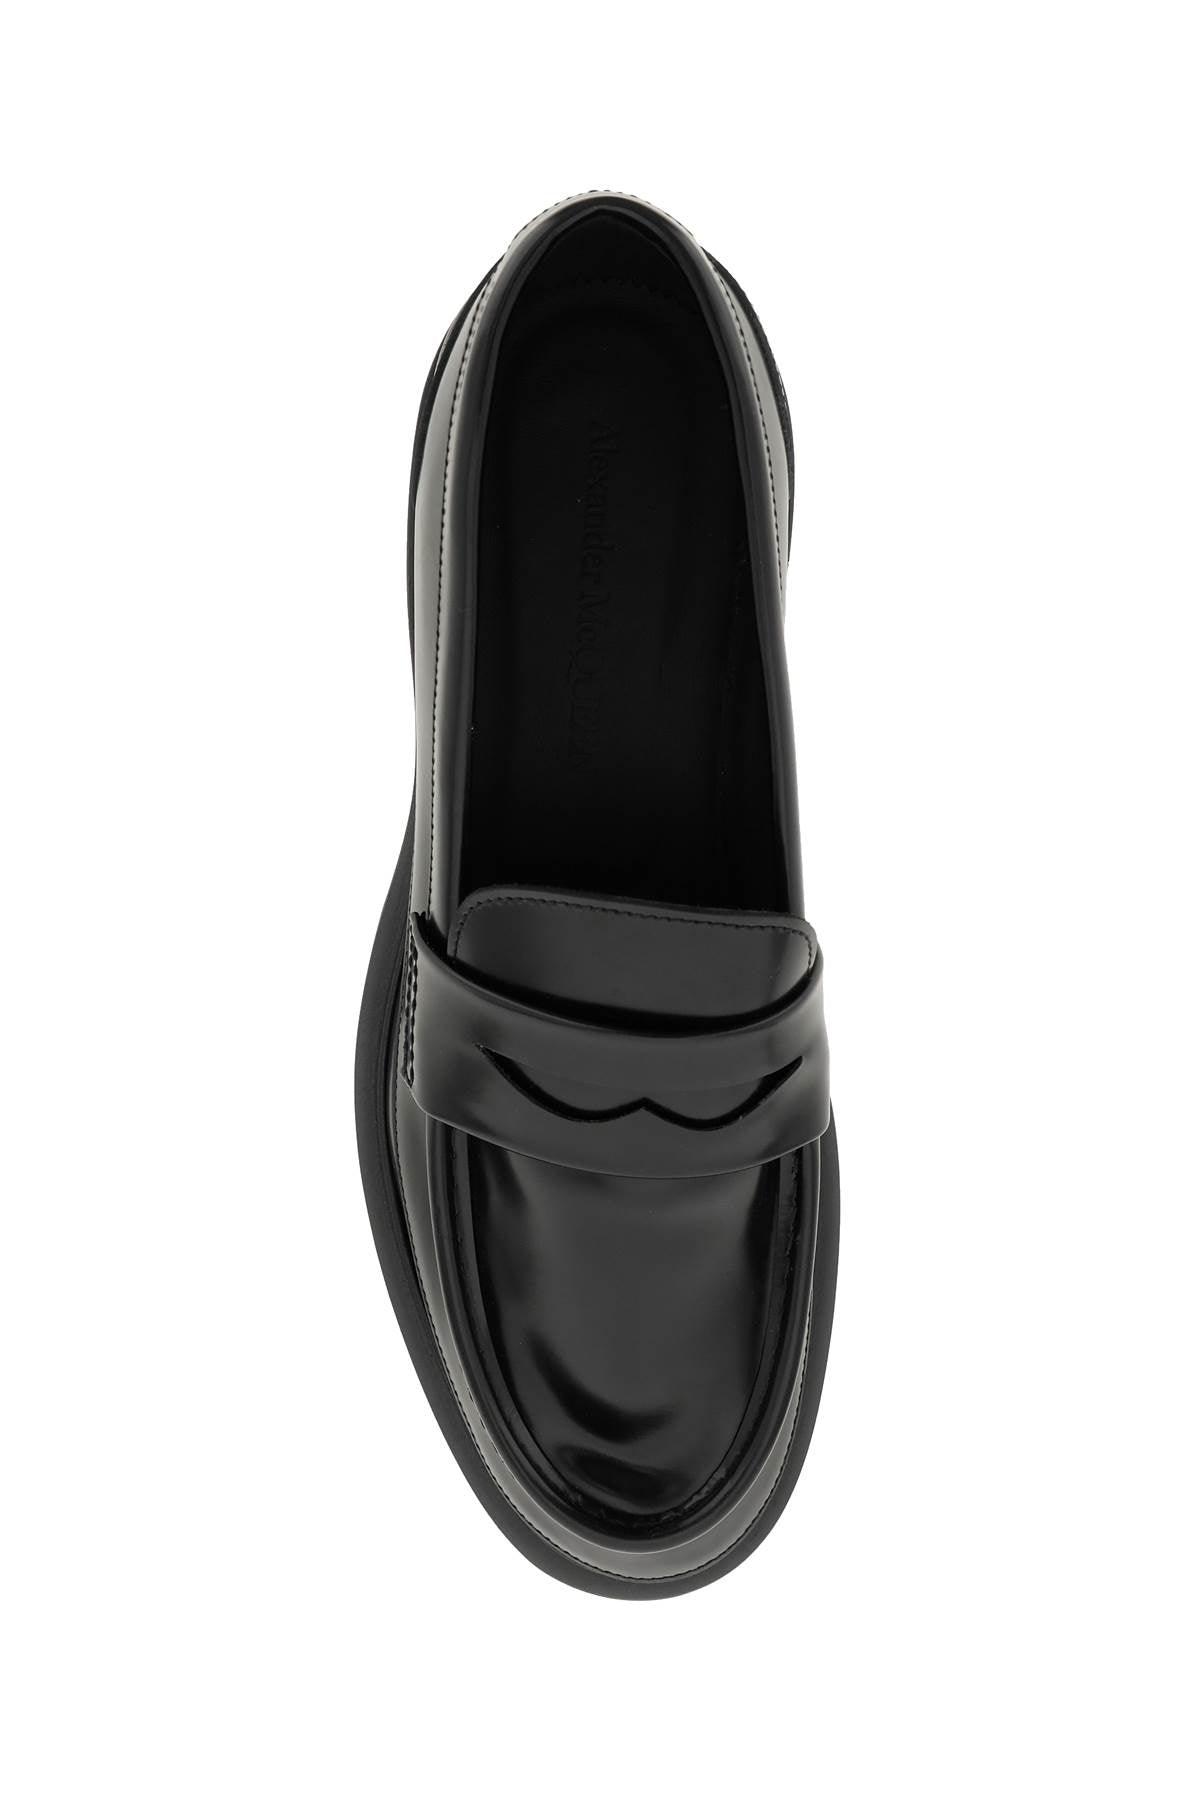 Alexander Mcqueen Brushed Leather Penny Loafers - JOHN JULIA